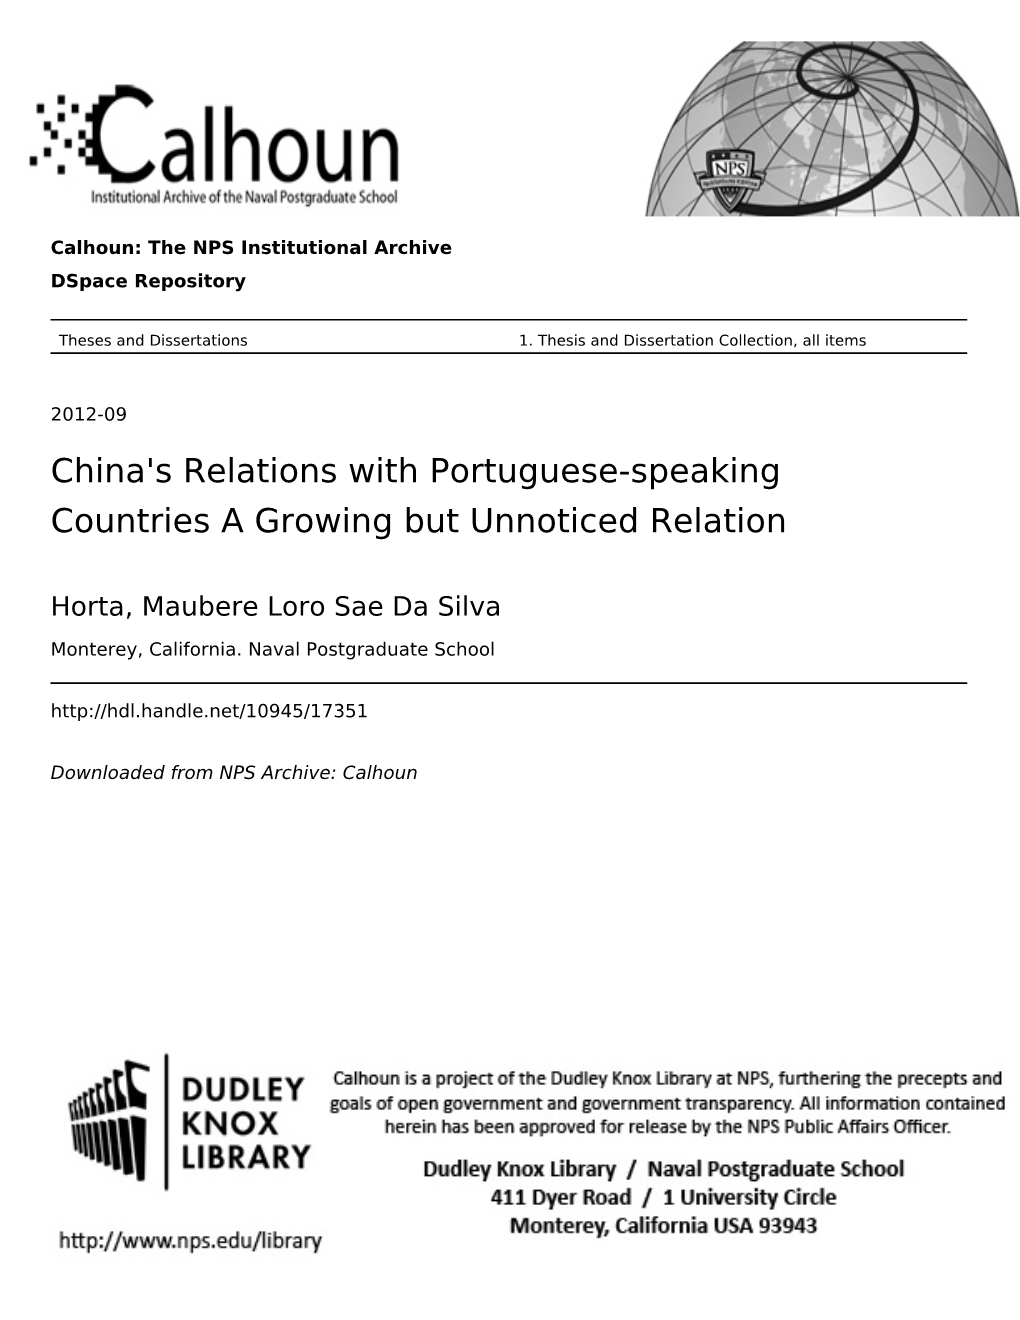 China's Relations with Portuguese-Speaking Countries a Growing but Unnoticed Relation